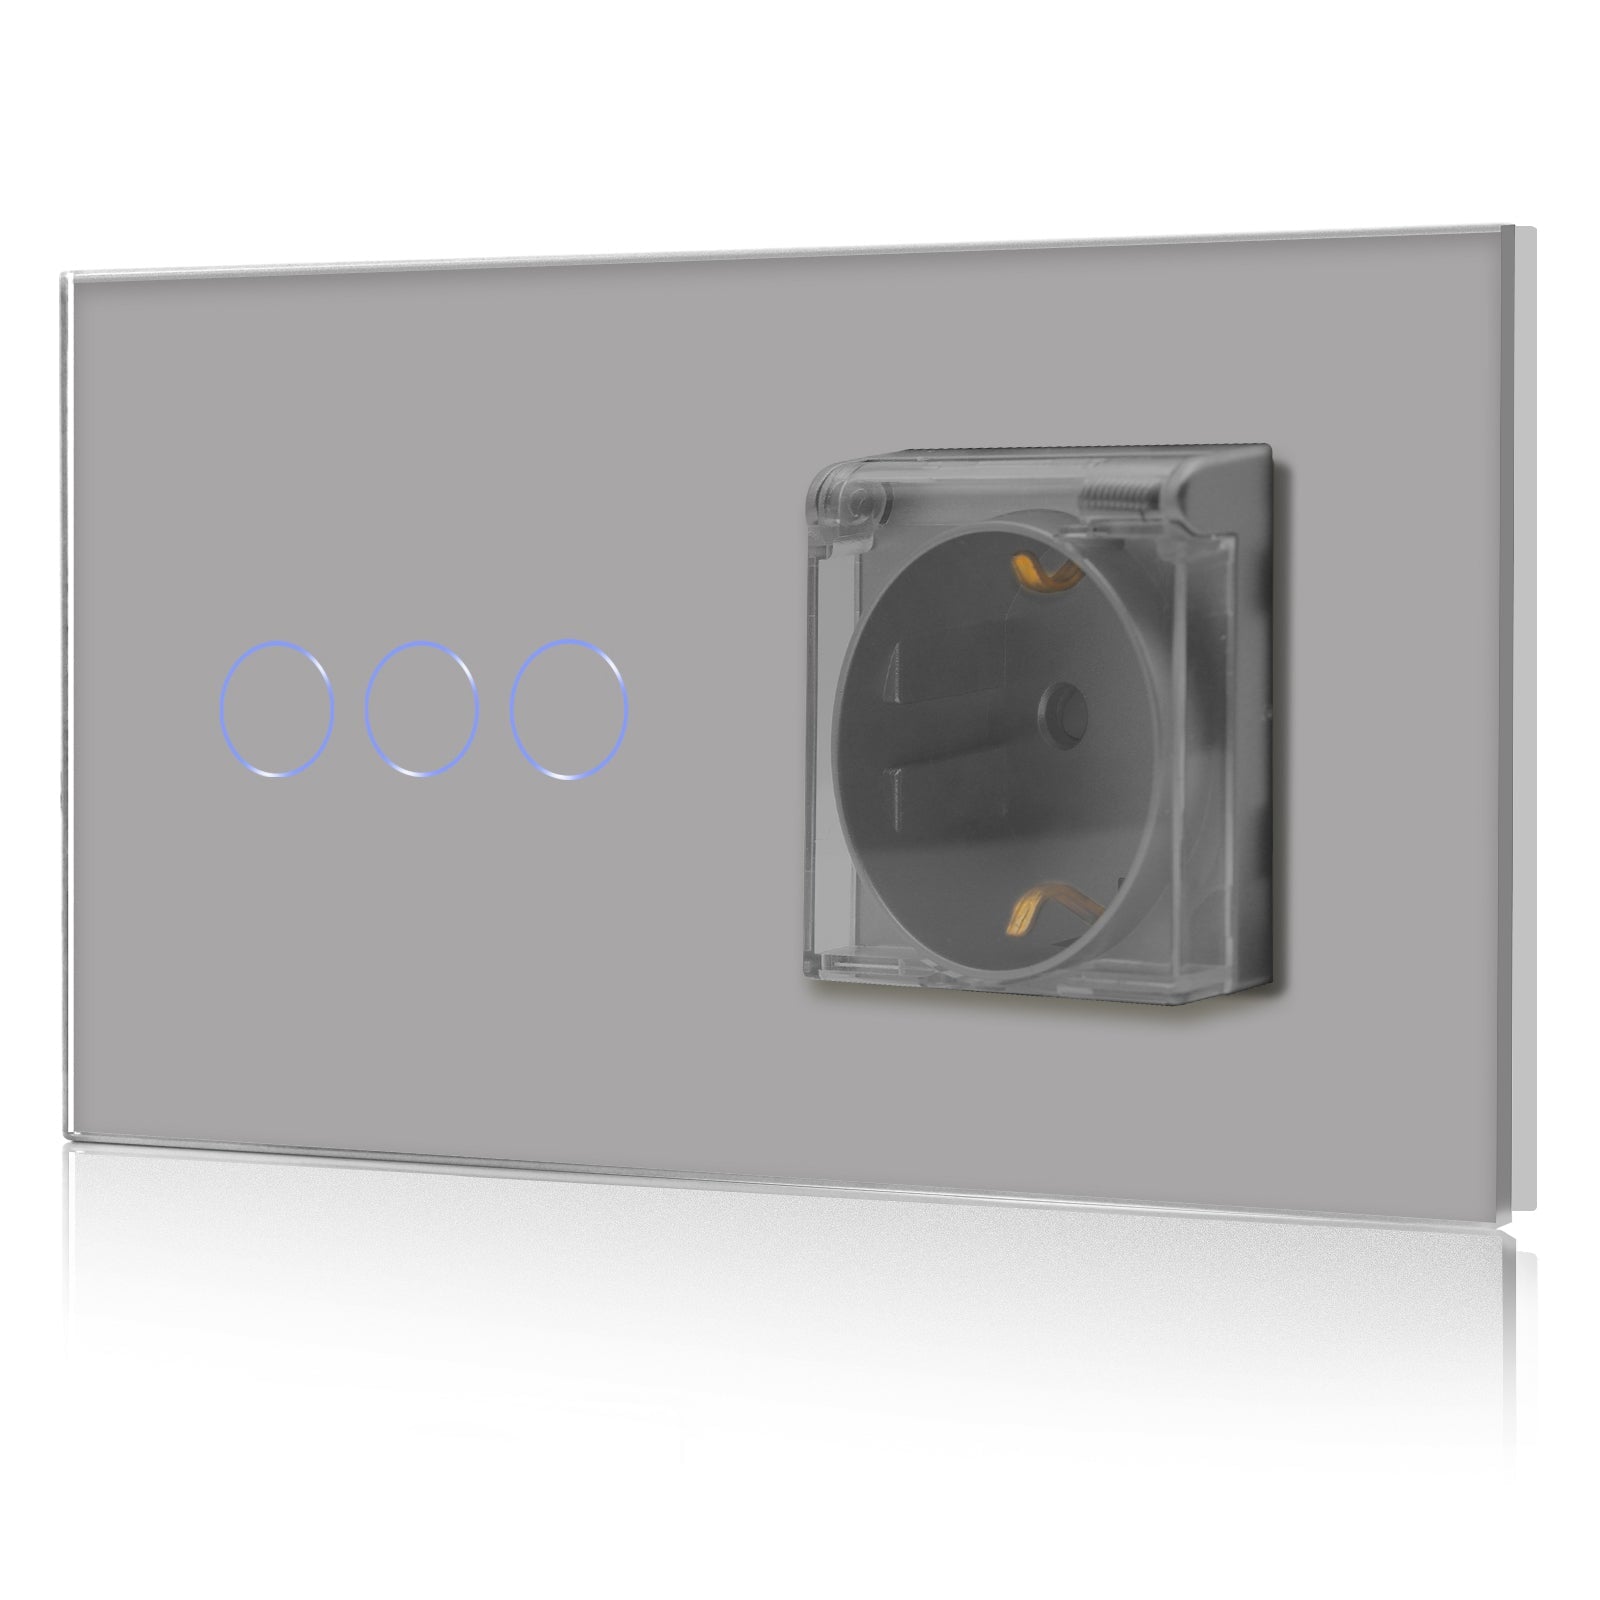 Bseed 1/2/3 Gang 1/2/3 Way Touch Light Switch with Waterproof Eu Socket 300W Wall Plates & Covers Bseedswitch Grey 3 Gang 1 Way